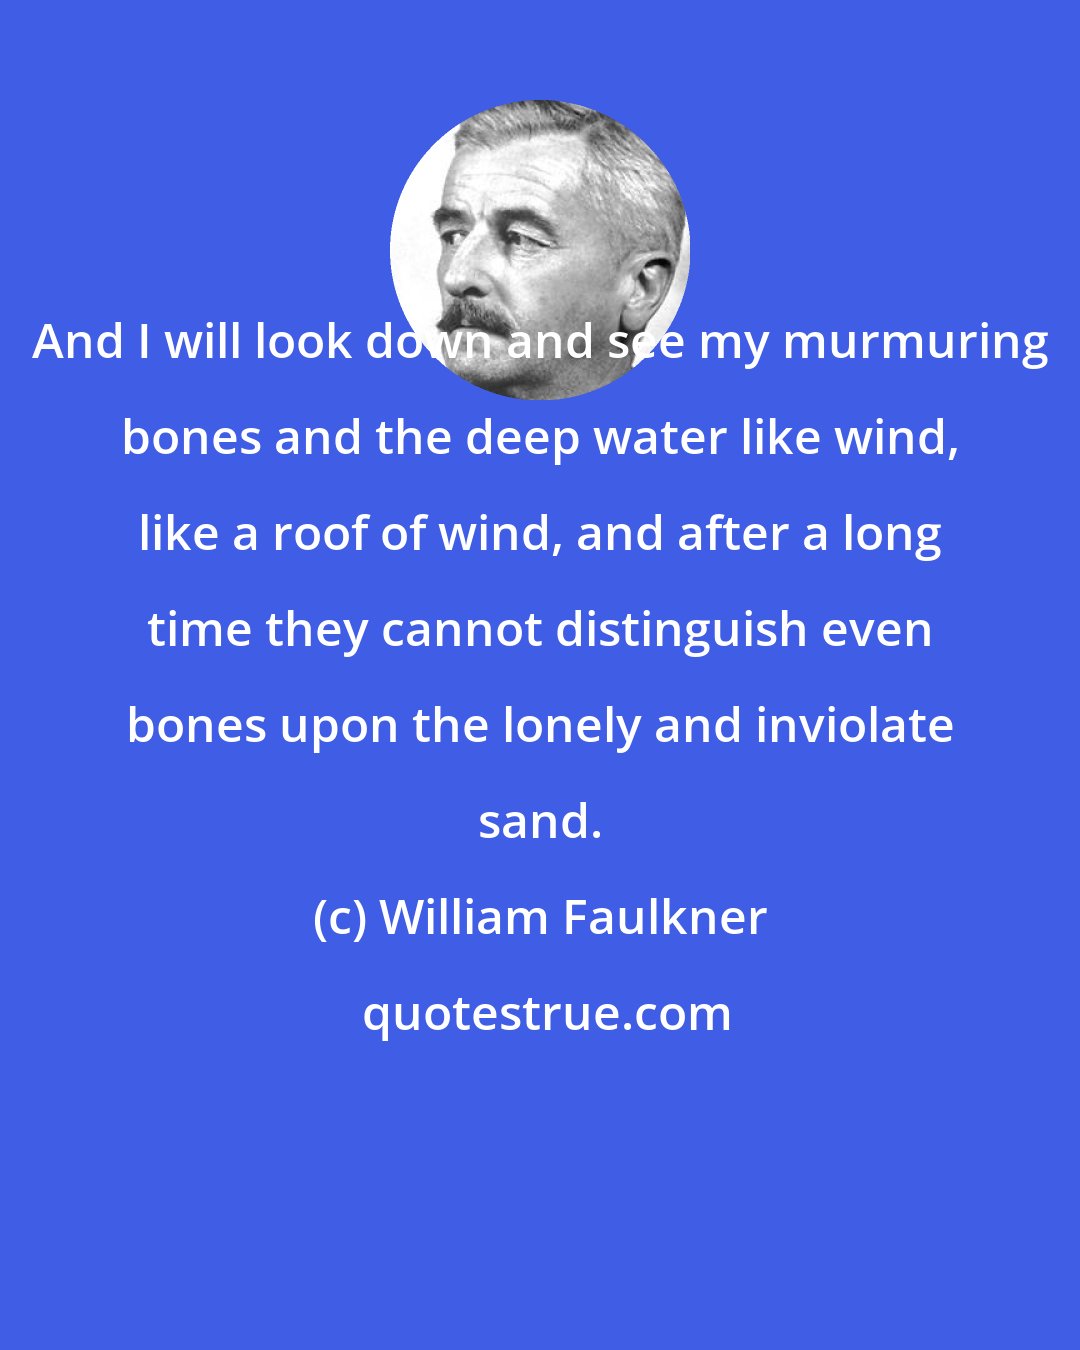 William Faulkner: And I will look down and see my murmuring bones and the deep water like wind, like a roof of wind, and after a long time they cannot distinguish even bones upon the lonely and inviolate sand.